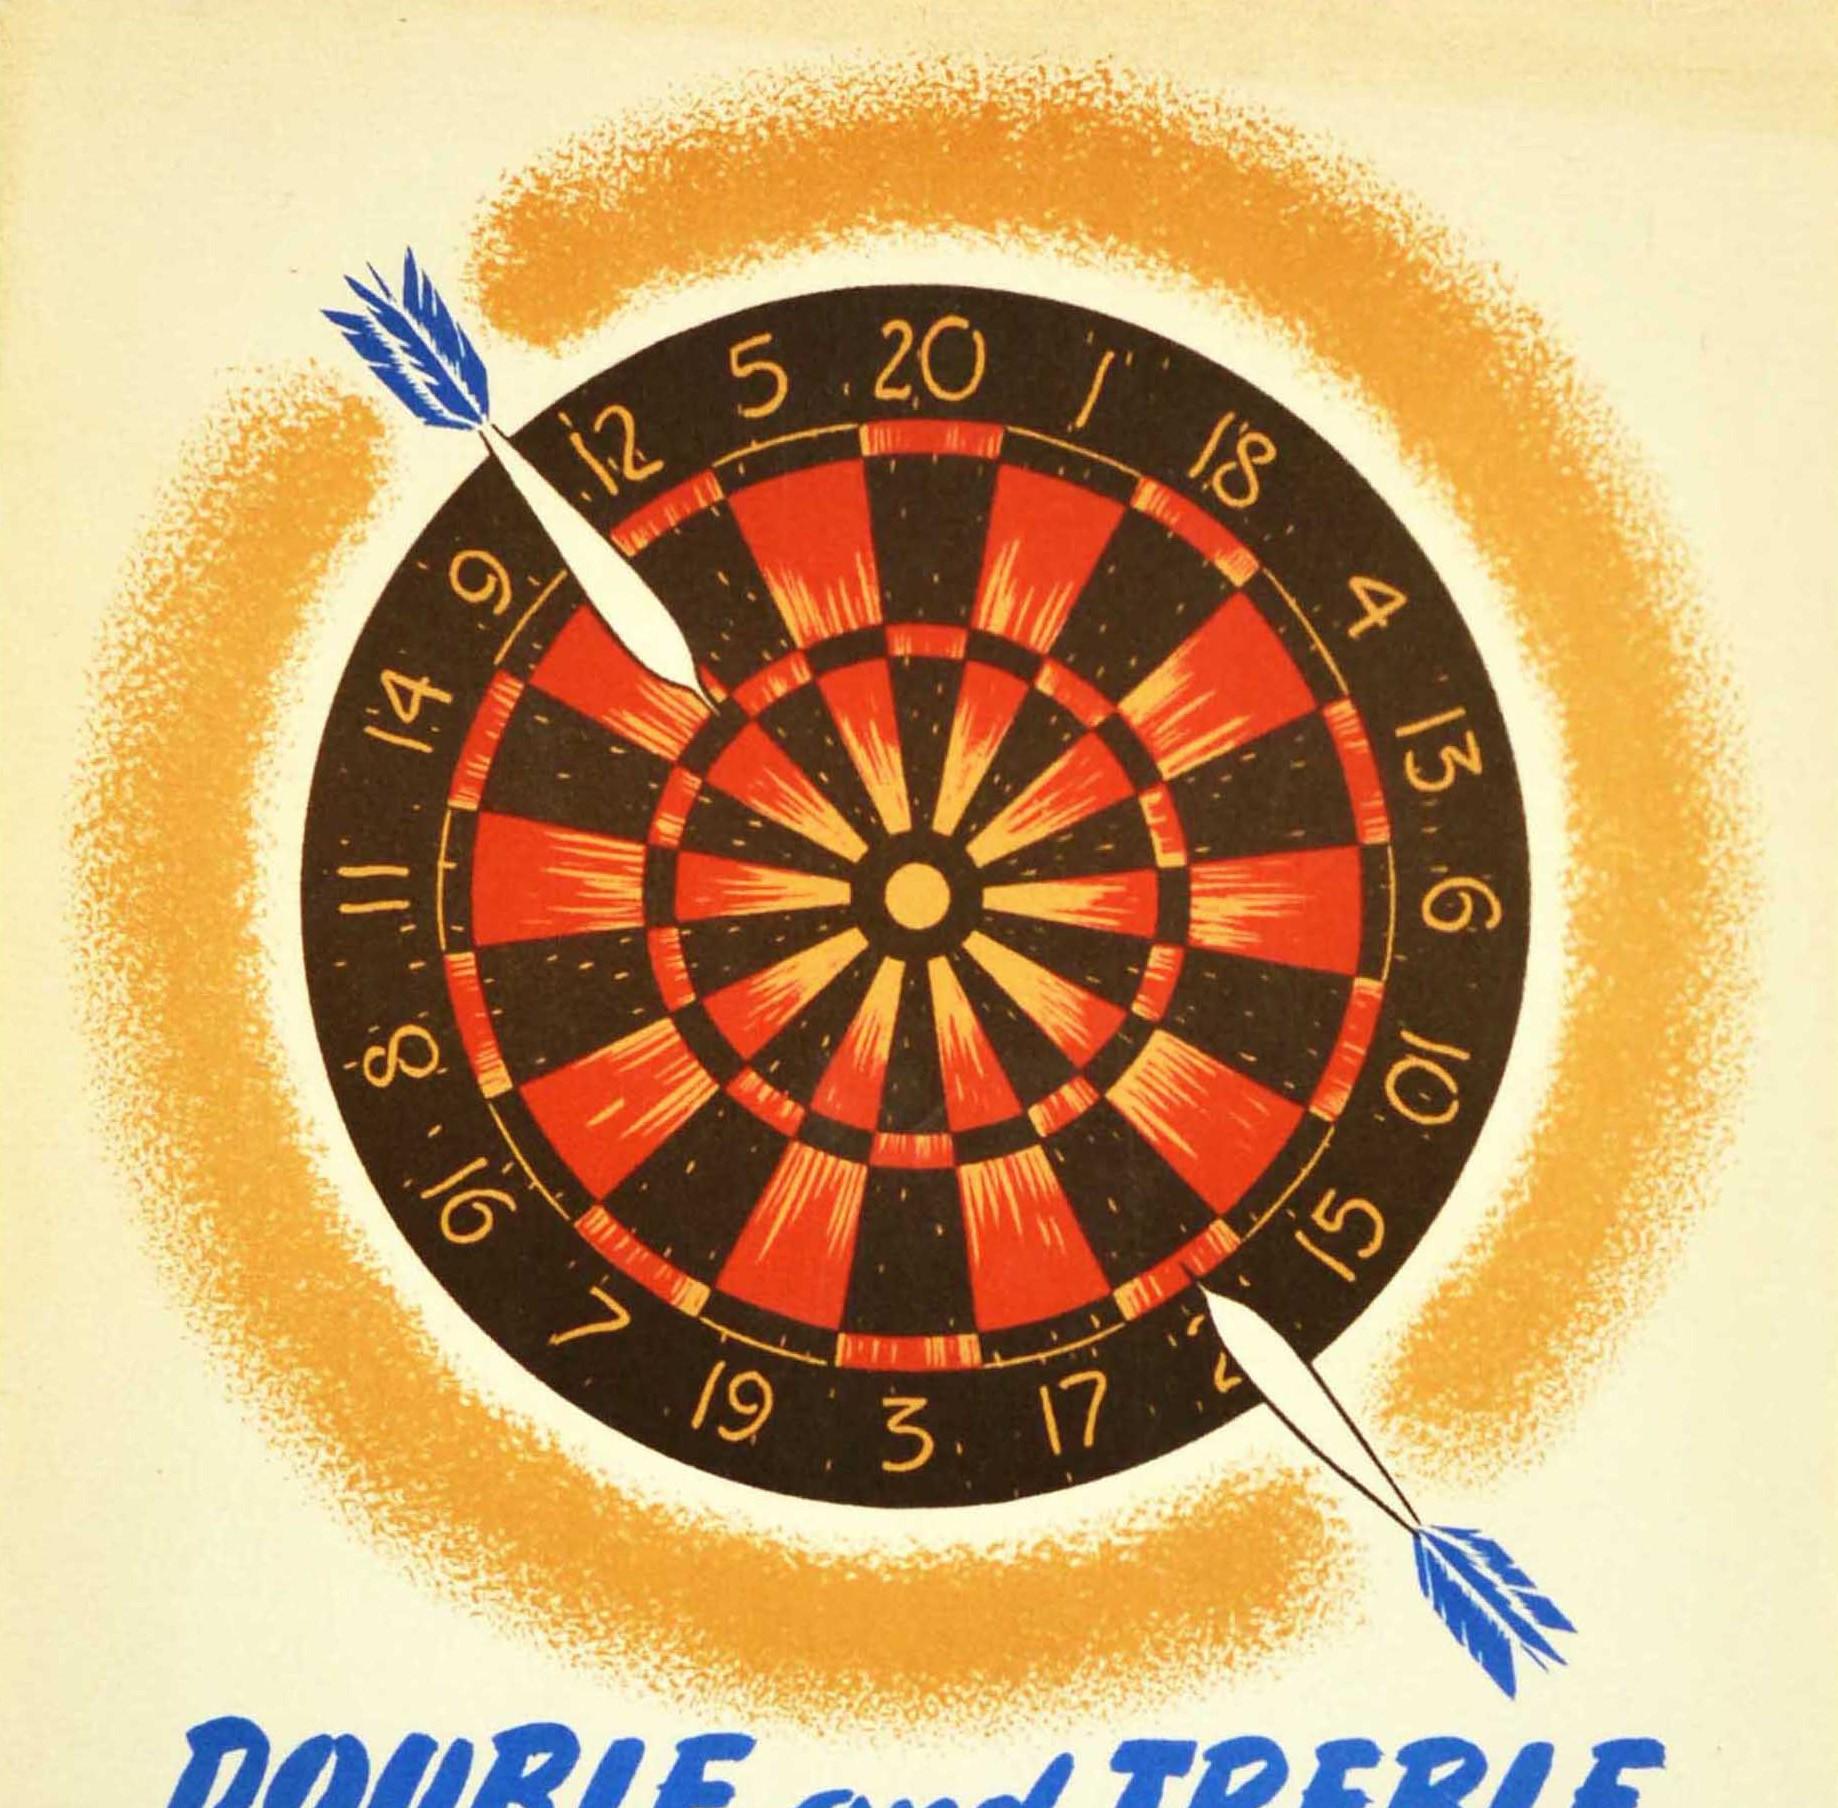 Original vintage World War Two home front poster - Double and Treble your efforts to save tractor fuel to speed the tanks - featuring an illustration of darts in a dartboard with the bold text in blue and red stylised lettering below. Printed for